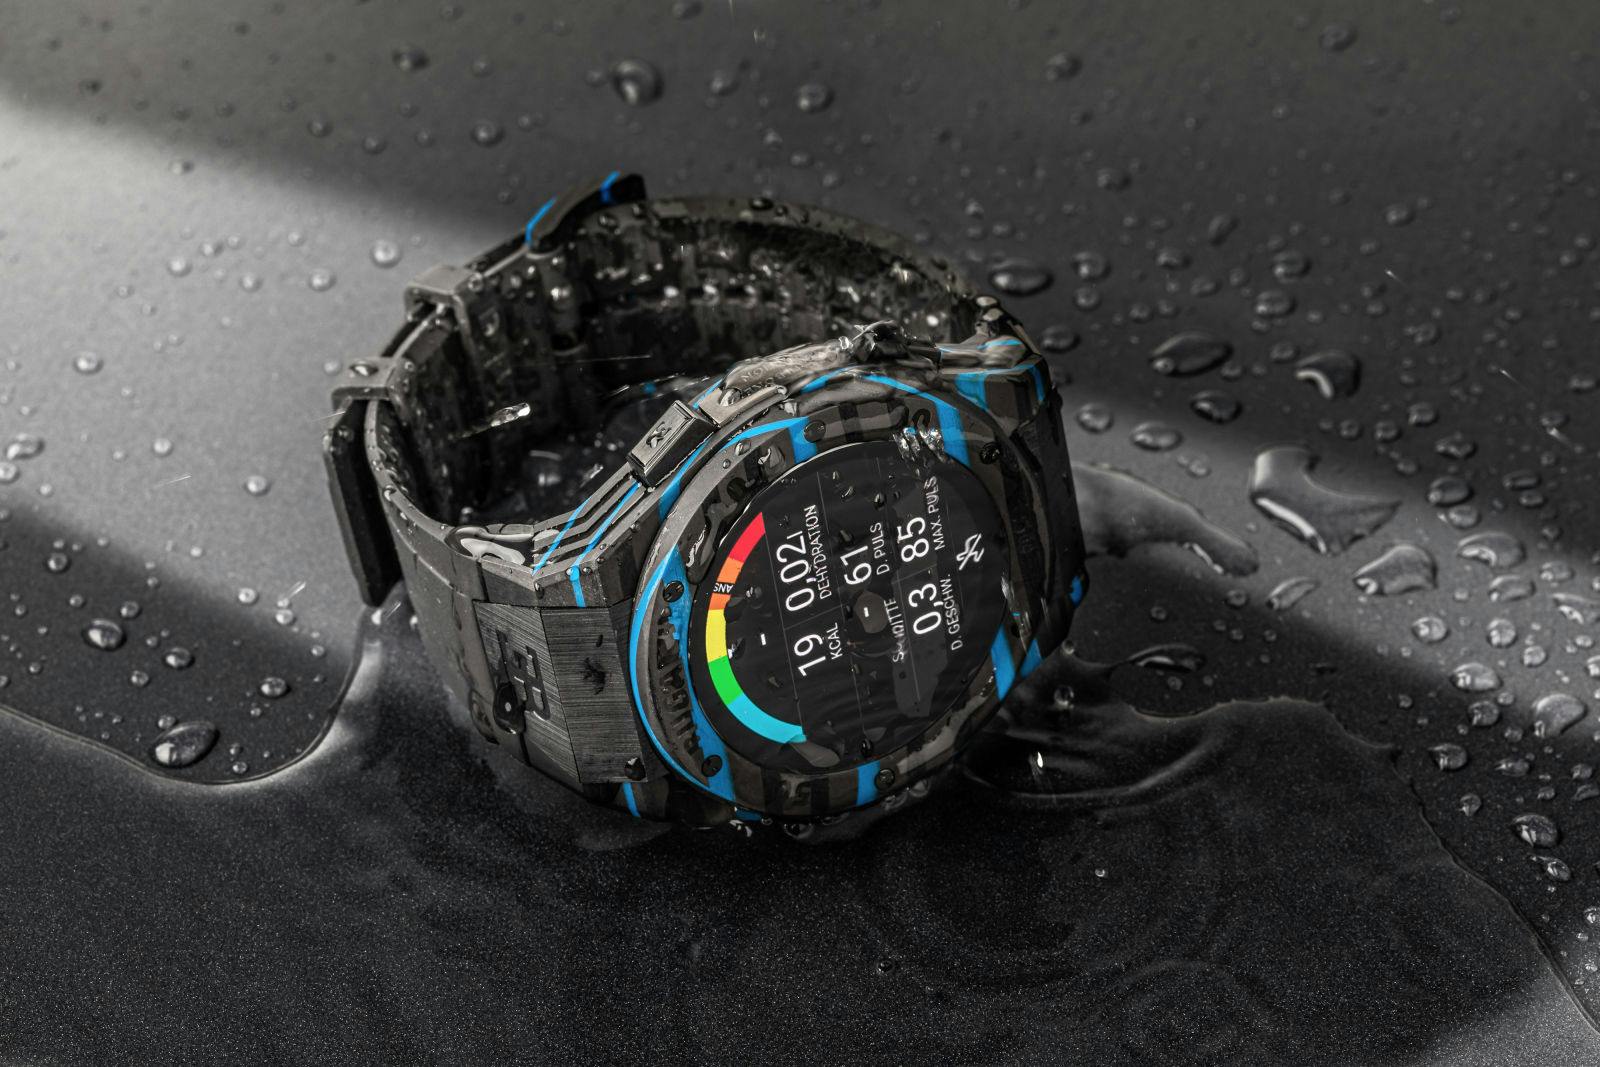 The Bugatti Carbone Limited Edition is waterproof to 100 m or 10 ATM.